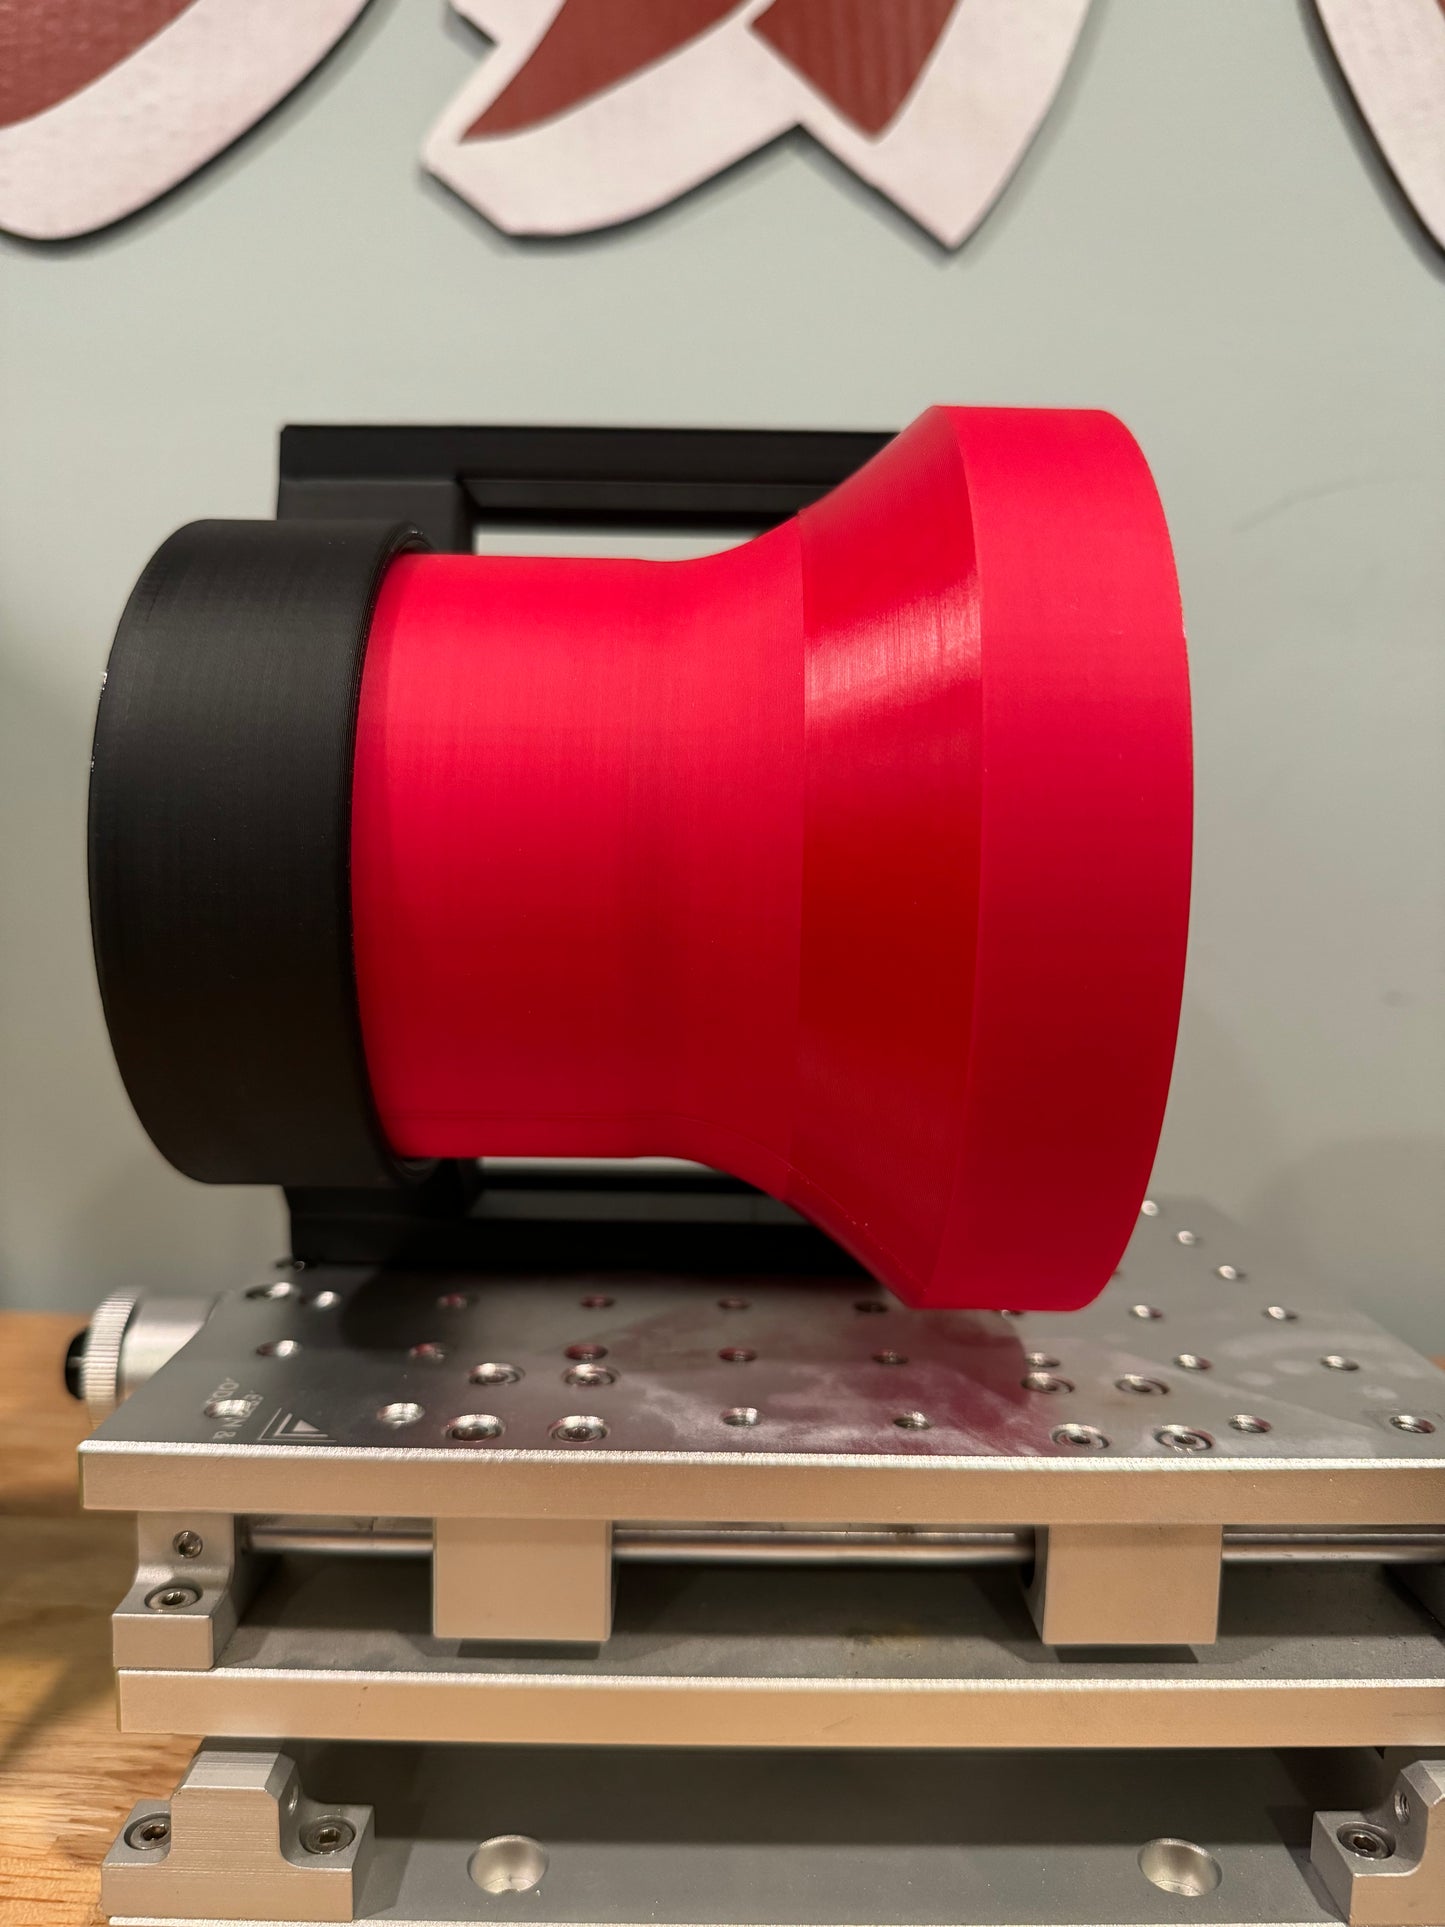 3D Printed Vent System tailored specifically for Fiber Laser Engravers